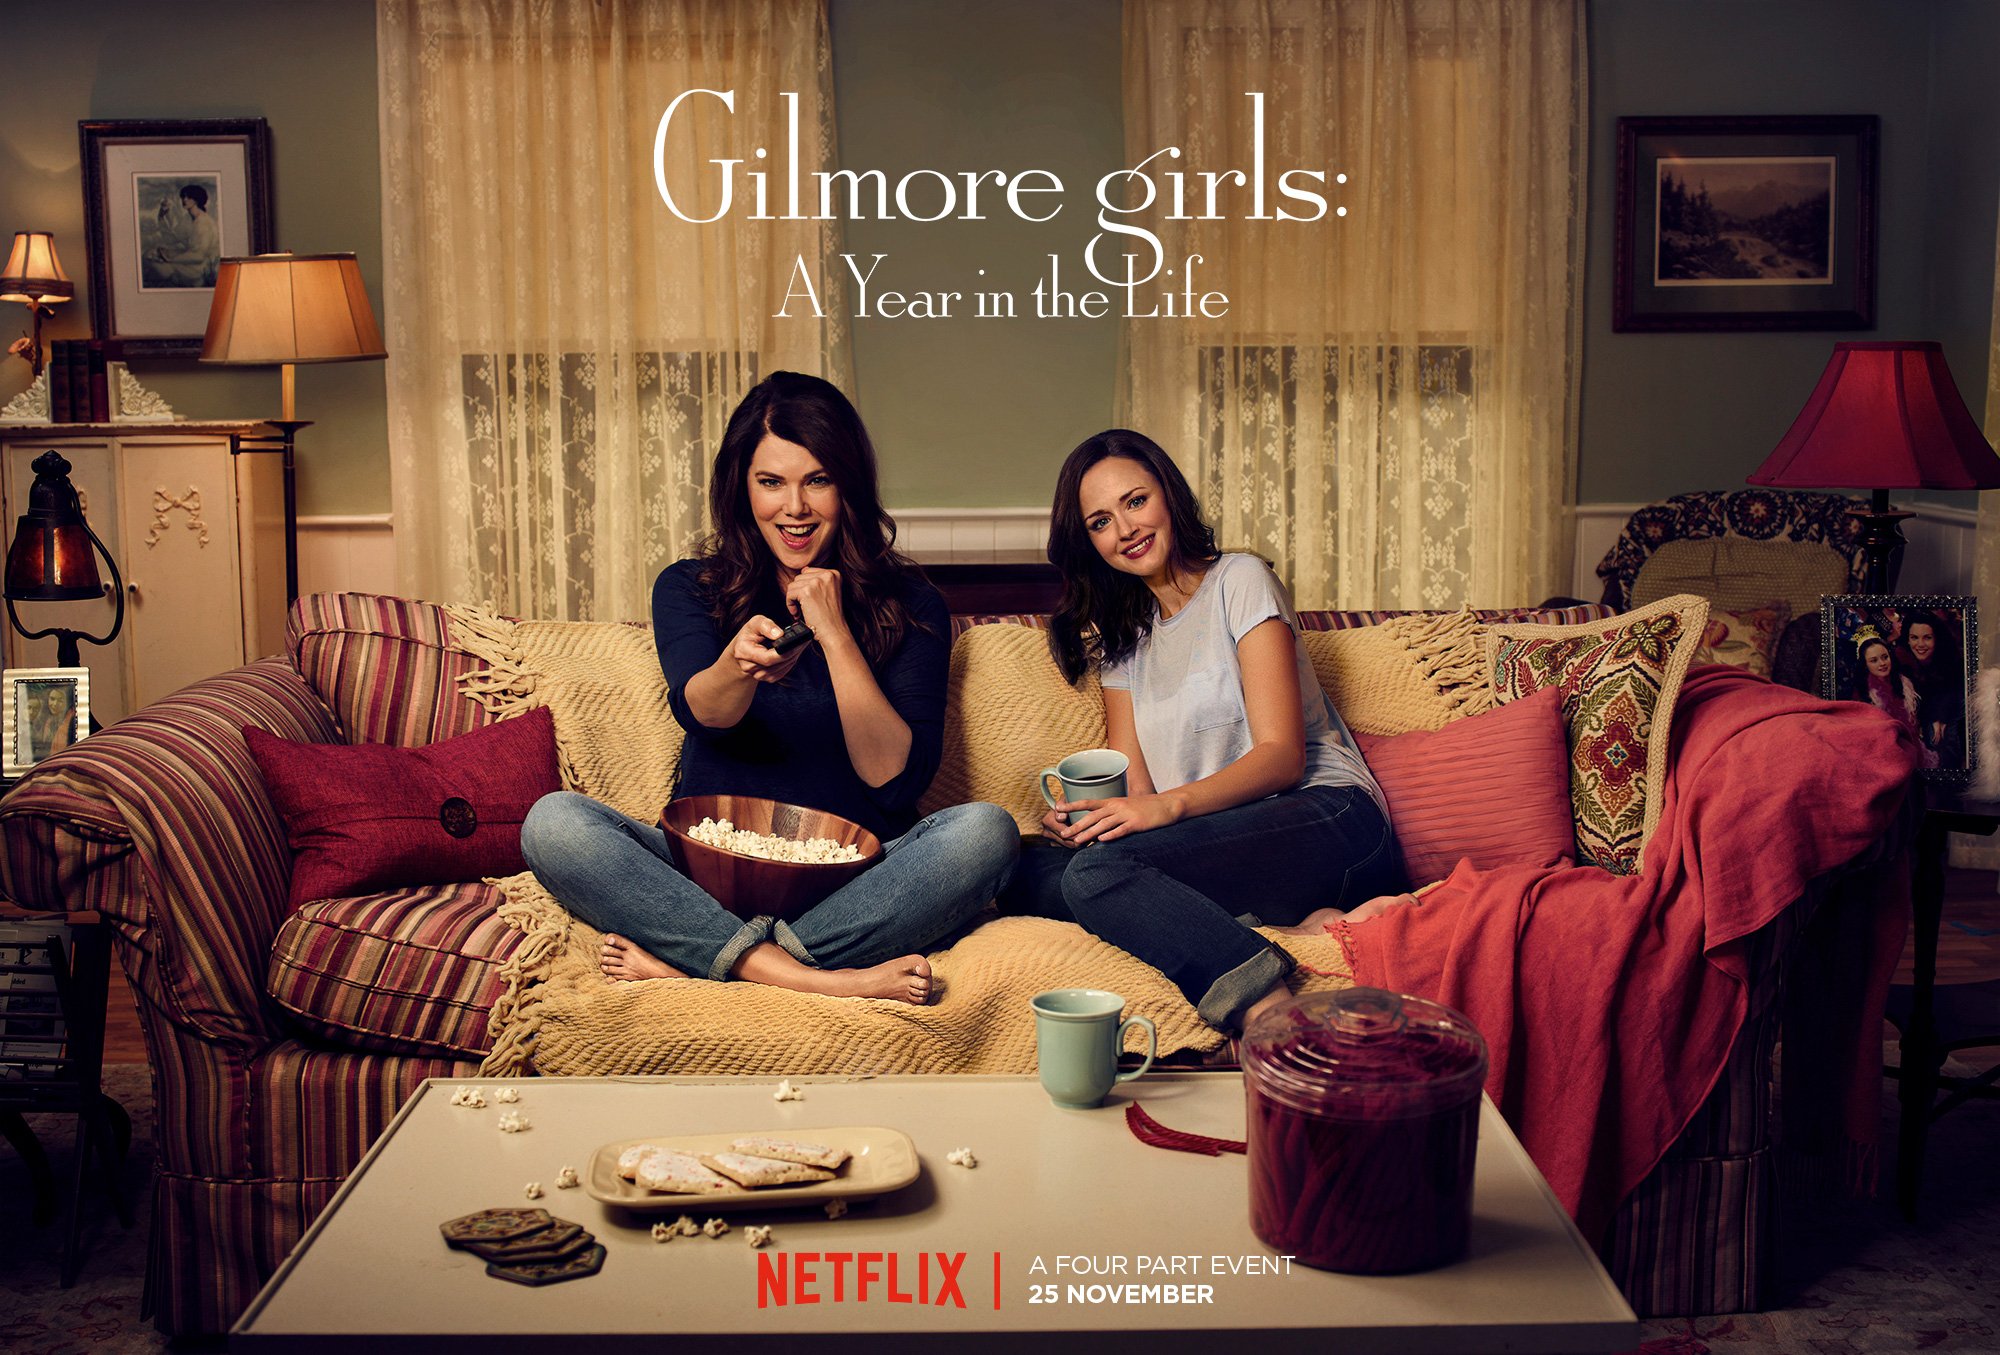 Lauren Graham and Alexis Bledel in a promotional poster for 'Gilmore Girls: A Year in the Life'  